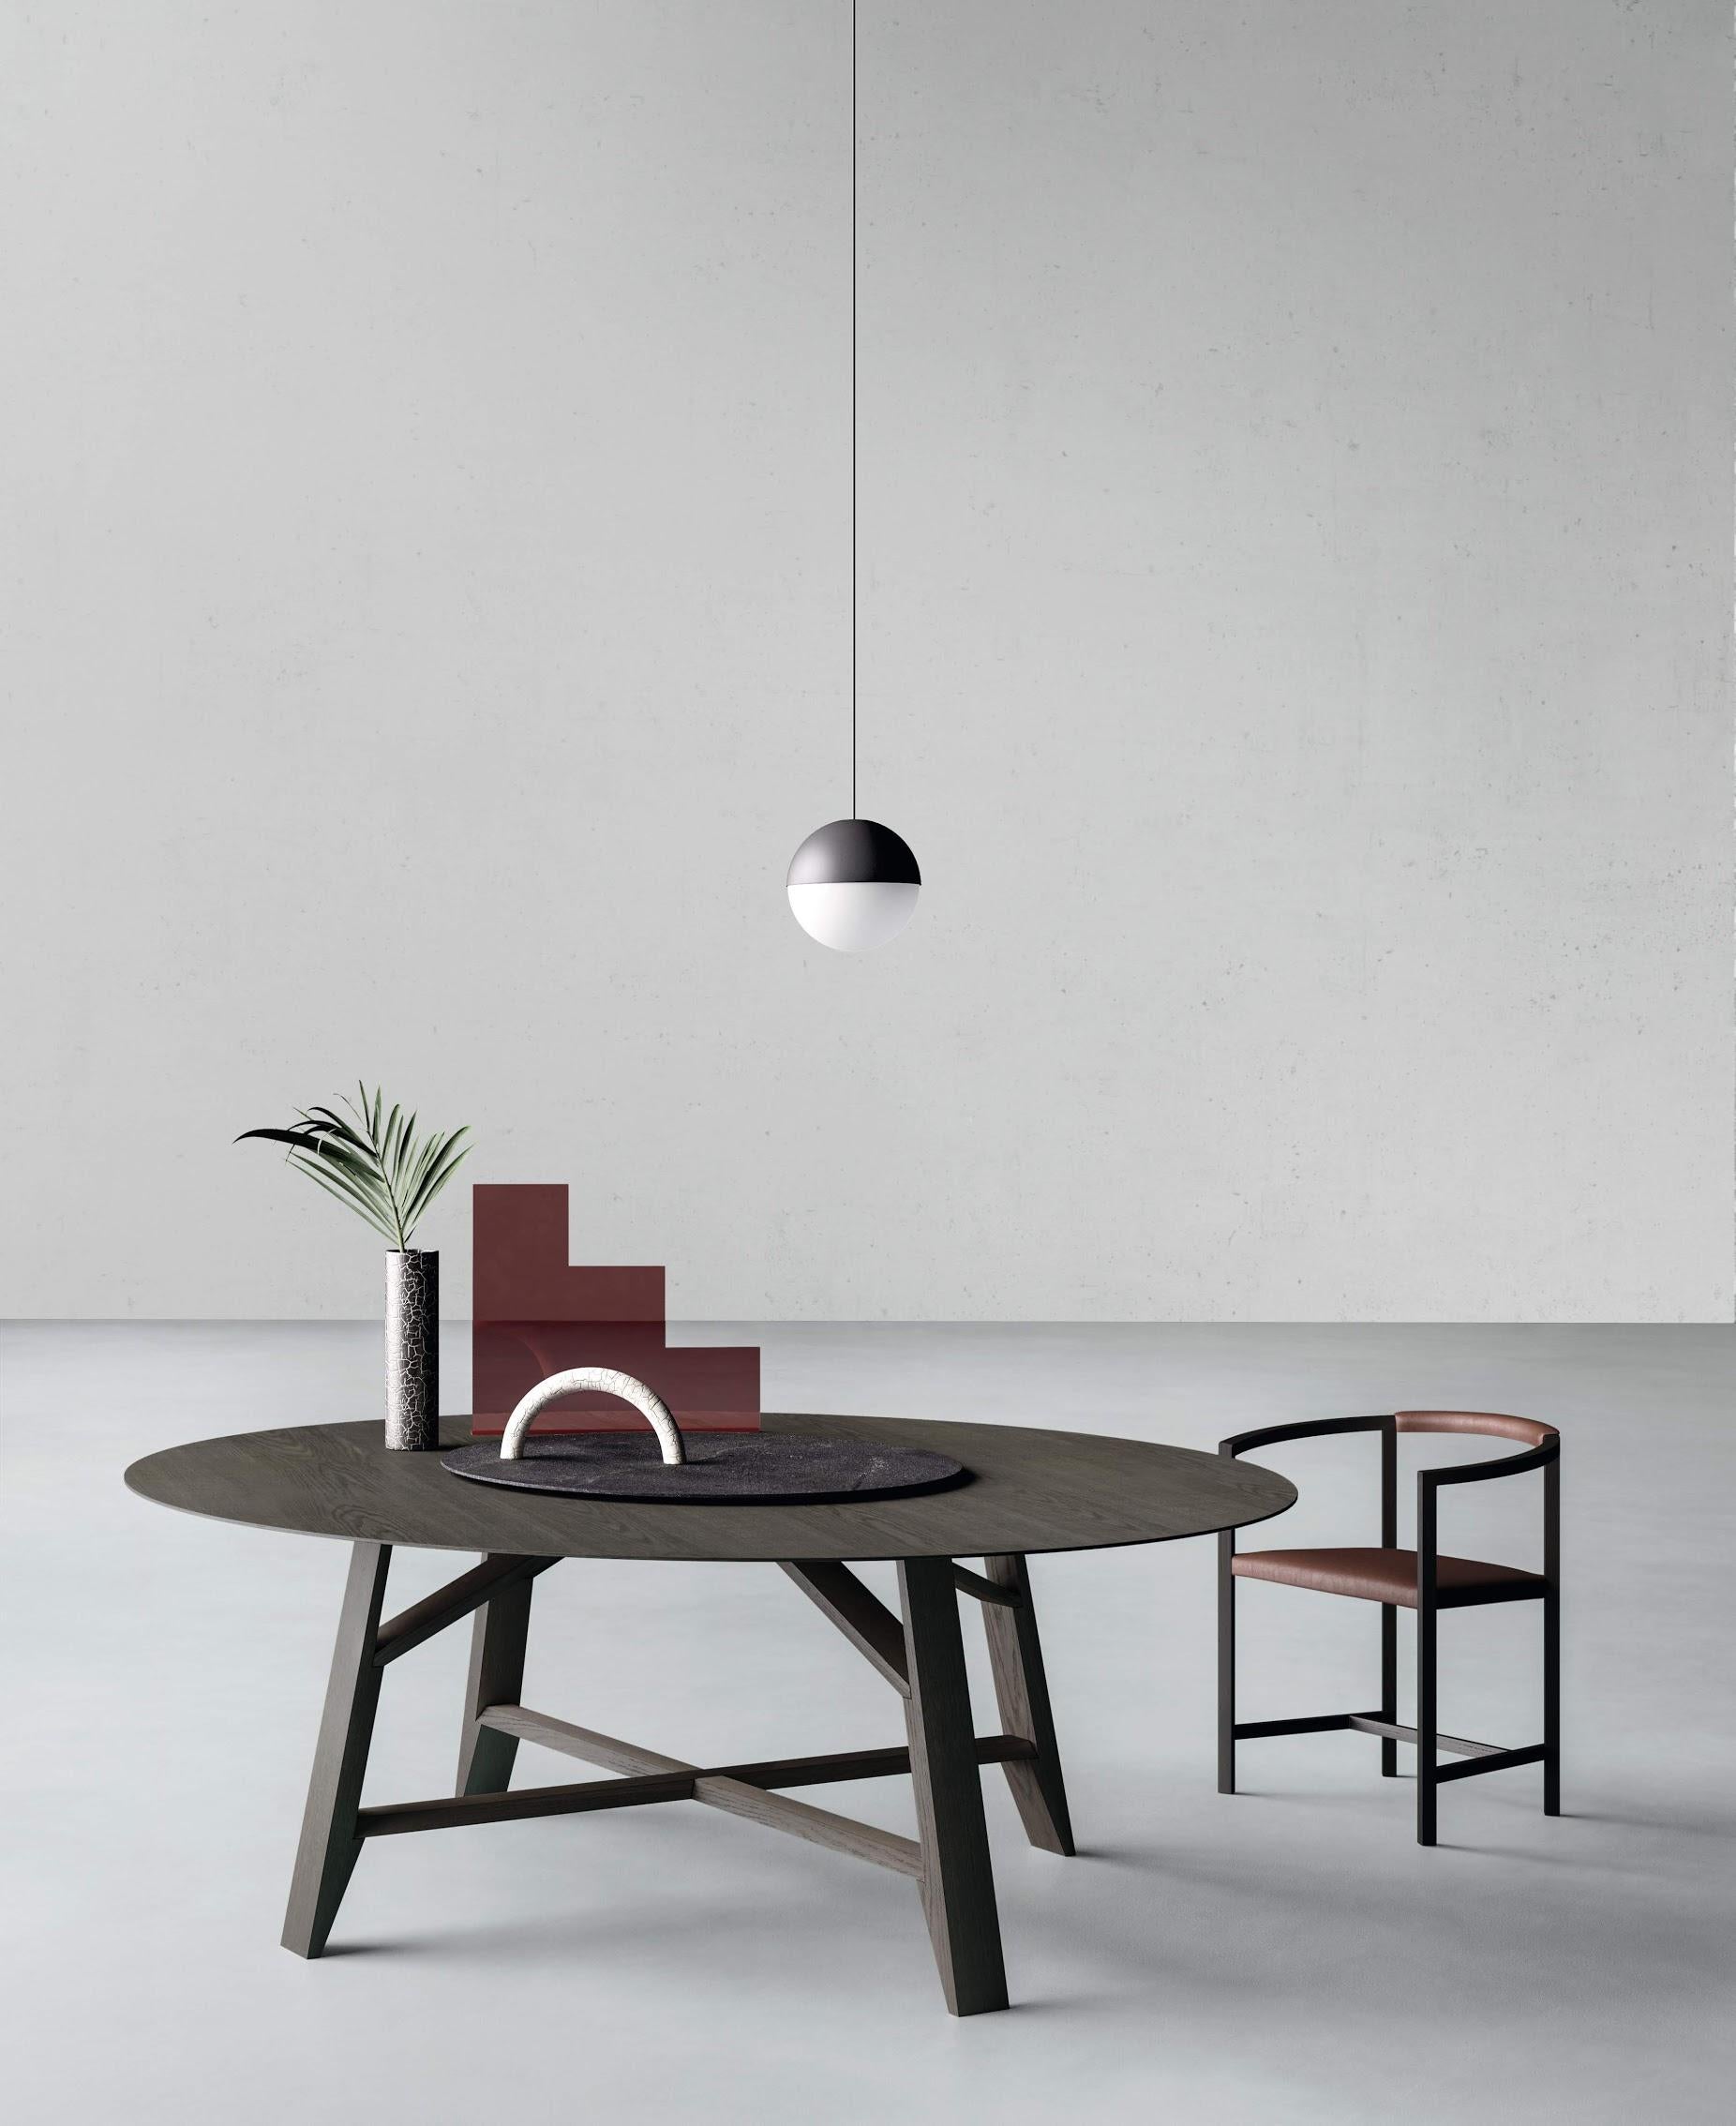 Controvento Table in Charcoal Gray with Revolving Tray by Busnelli (Moderne) im Angebot